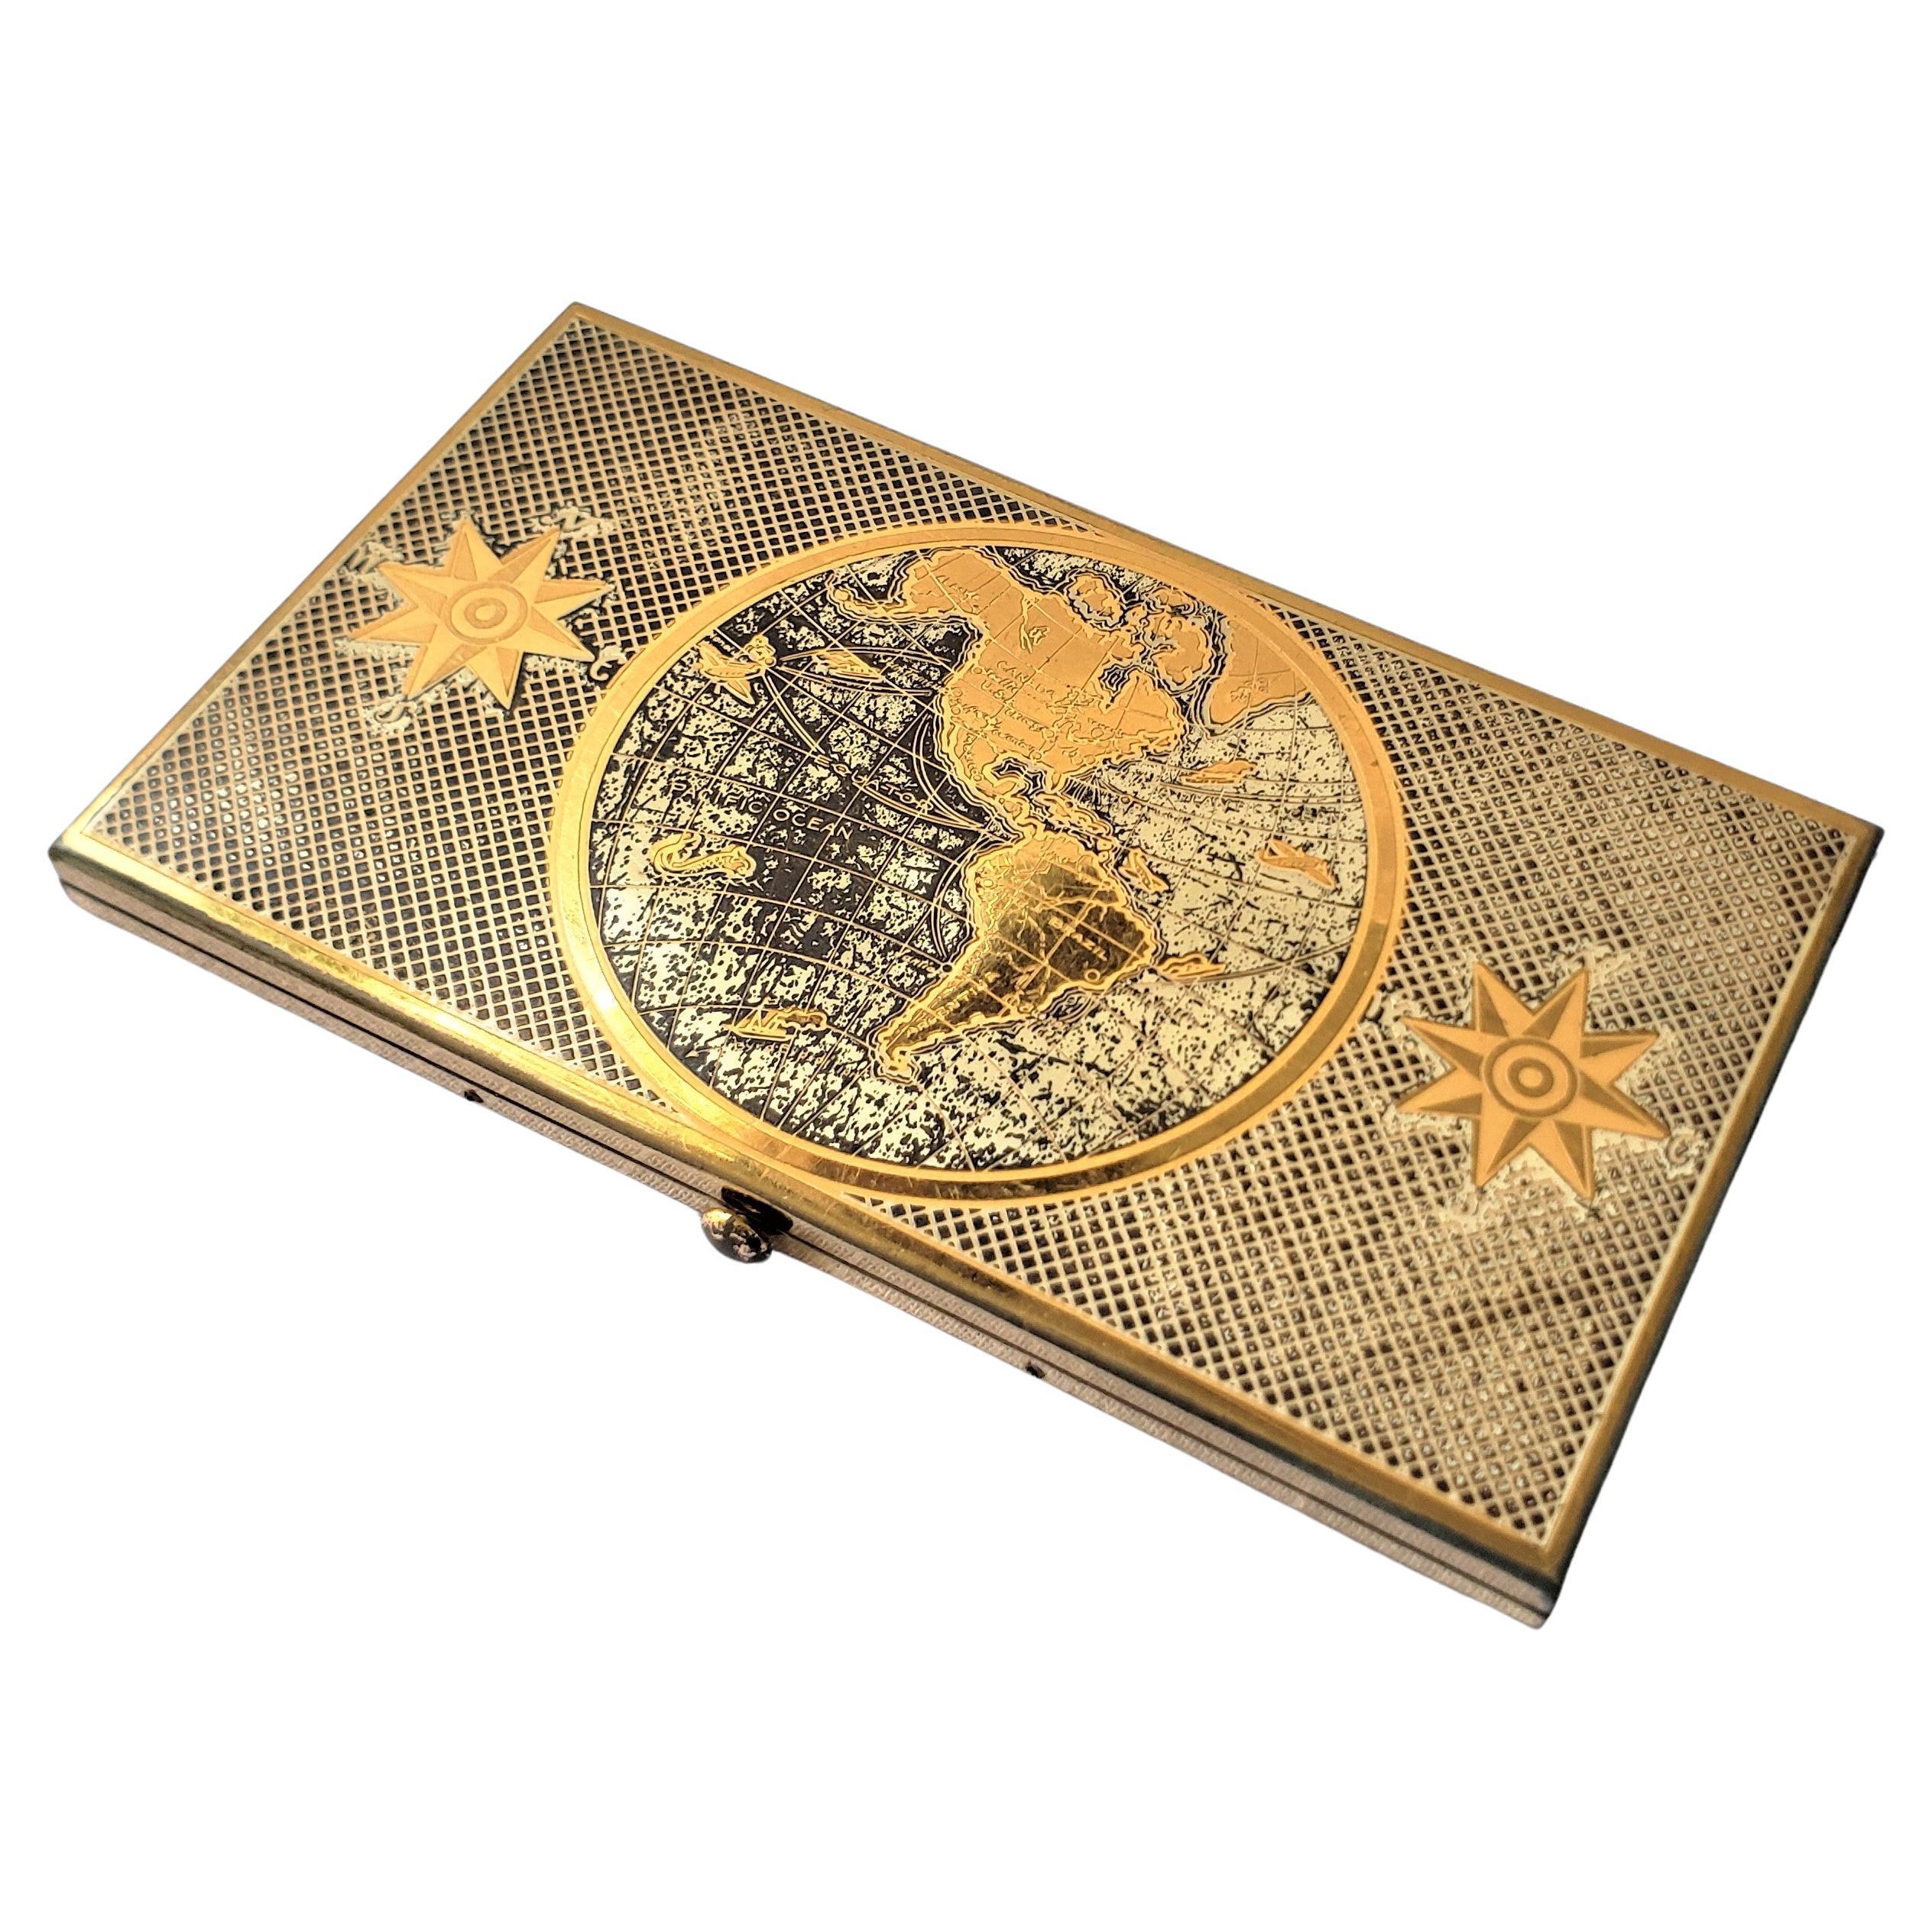 Large Mid-Century Era Metal Cigarette Case with World Globe & Compass Decoration For Sale